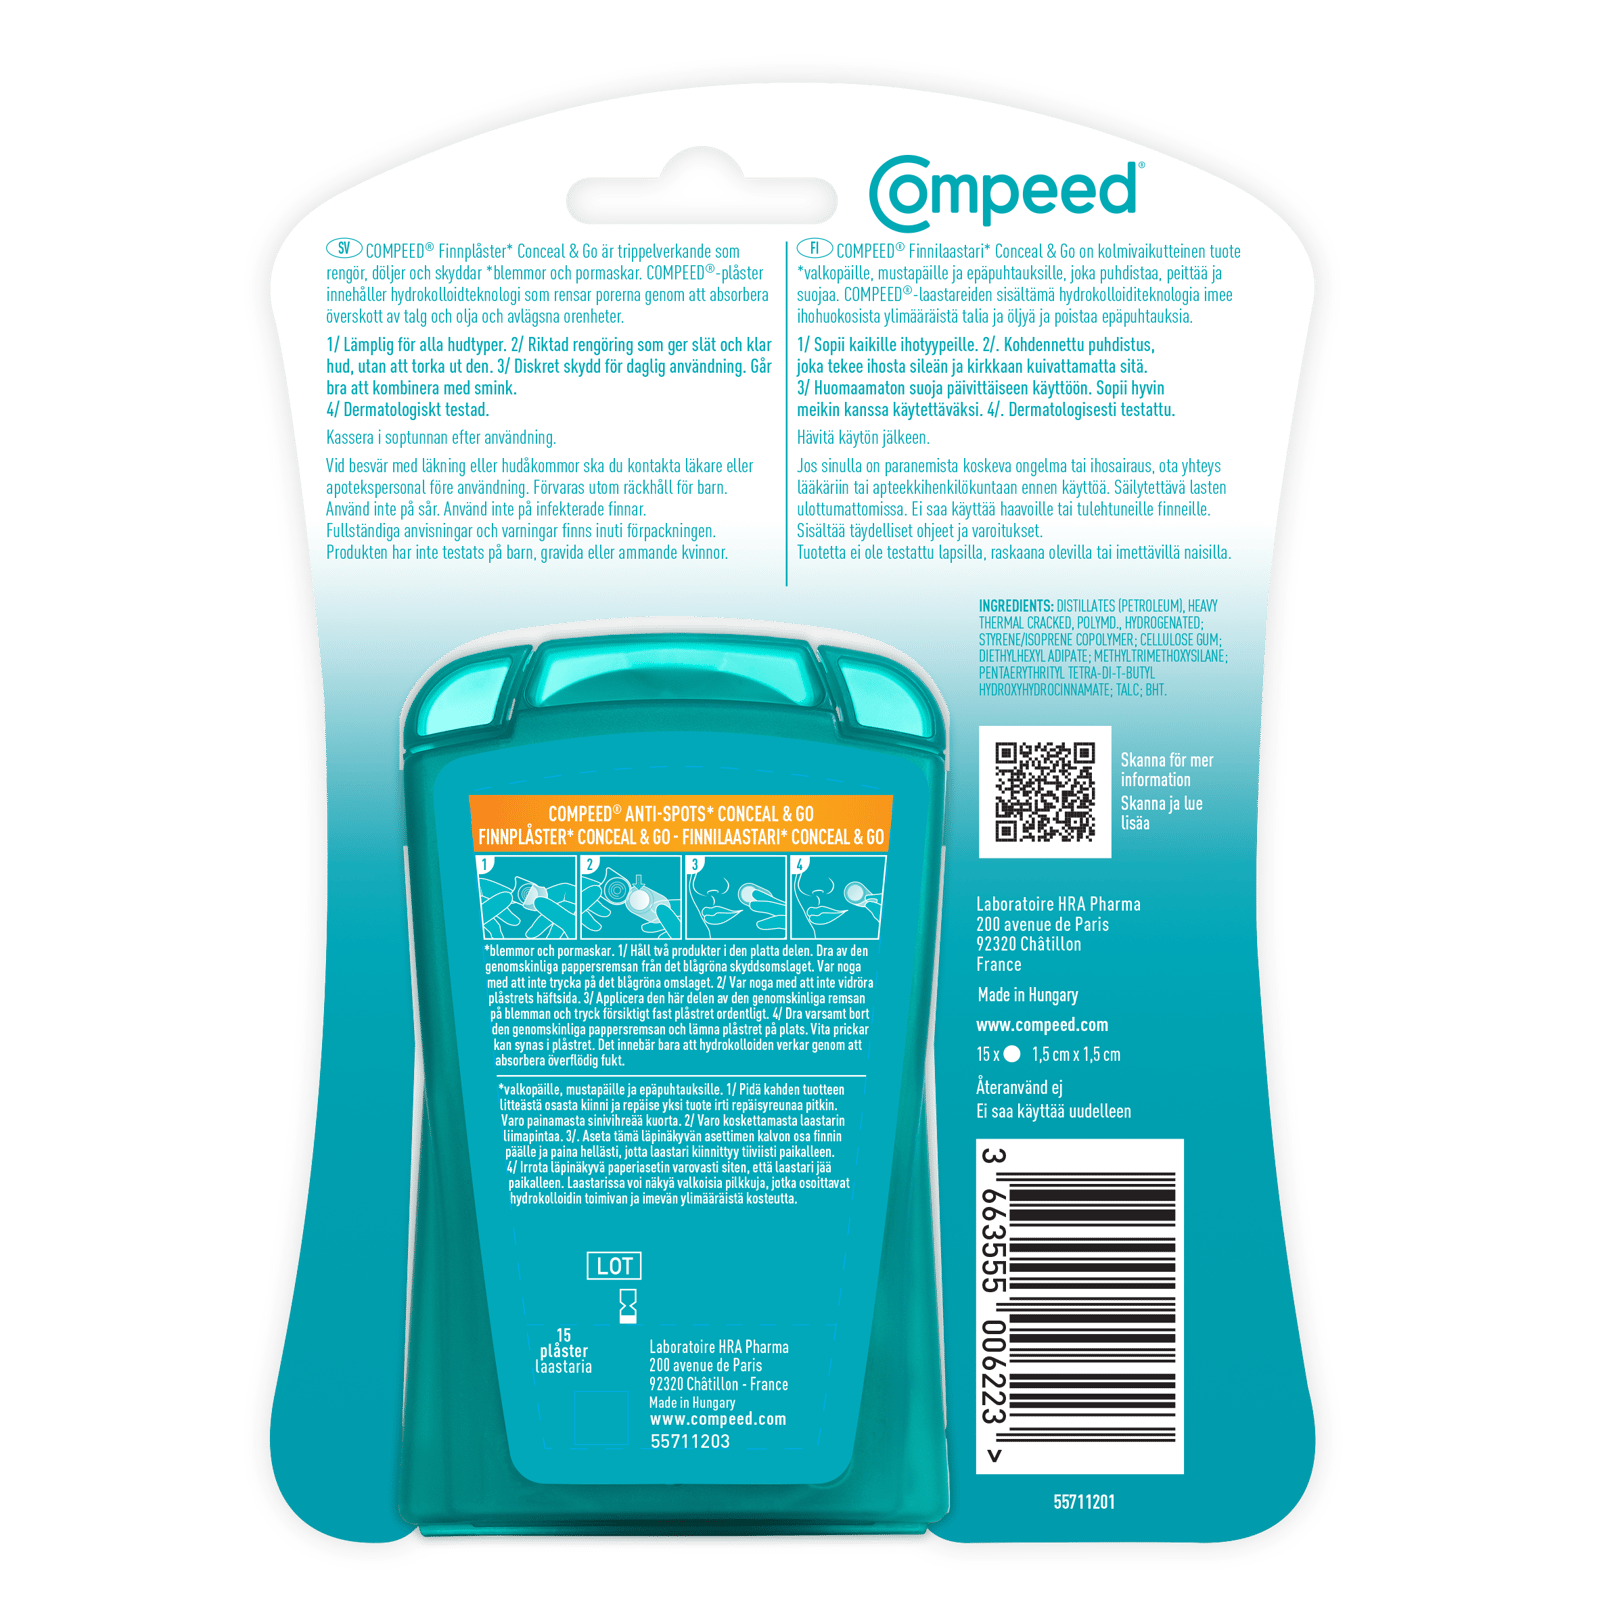 Compeed Anti-Spots Conceal & Go Finnplåster 15 st